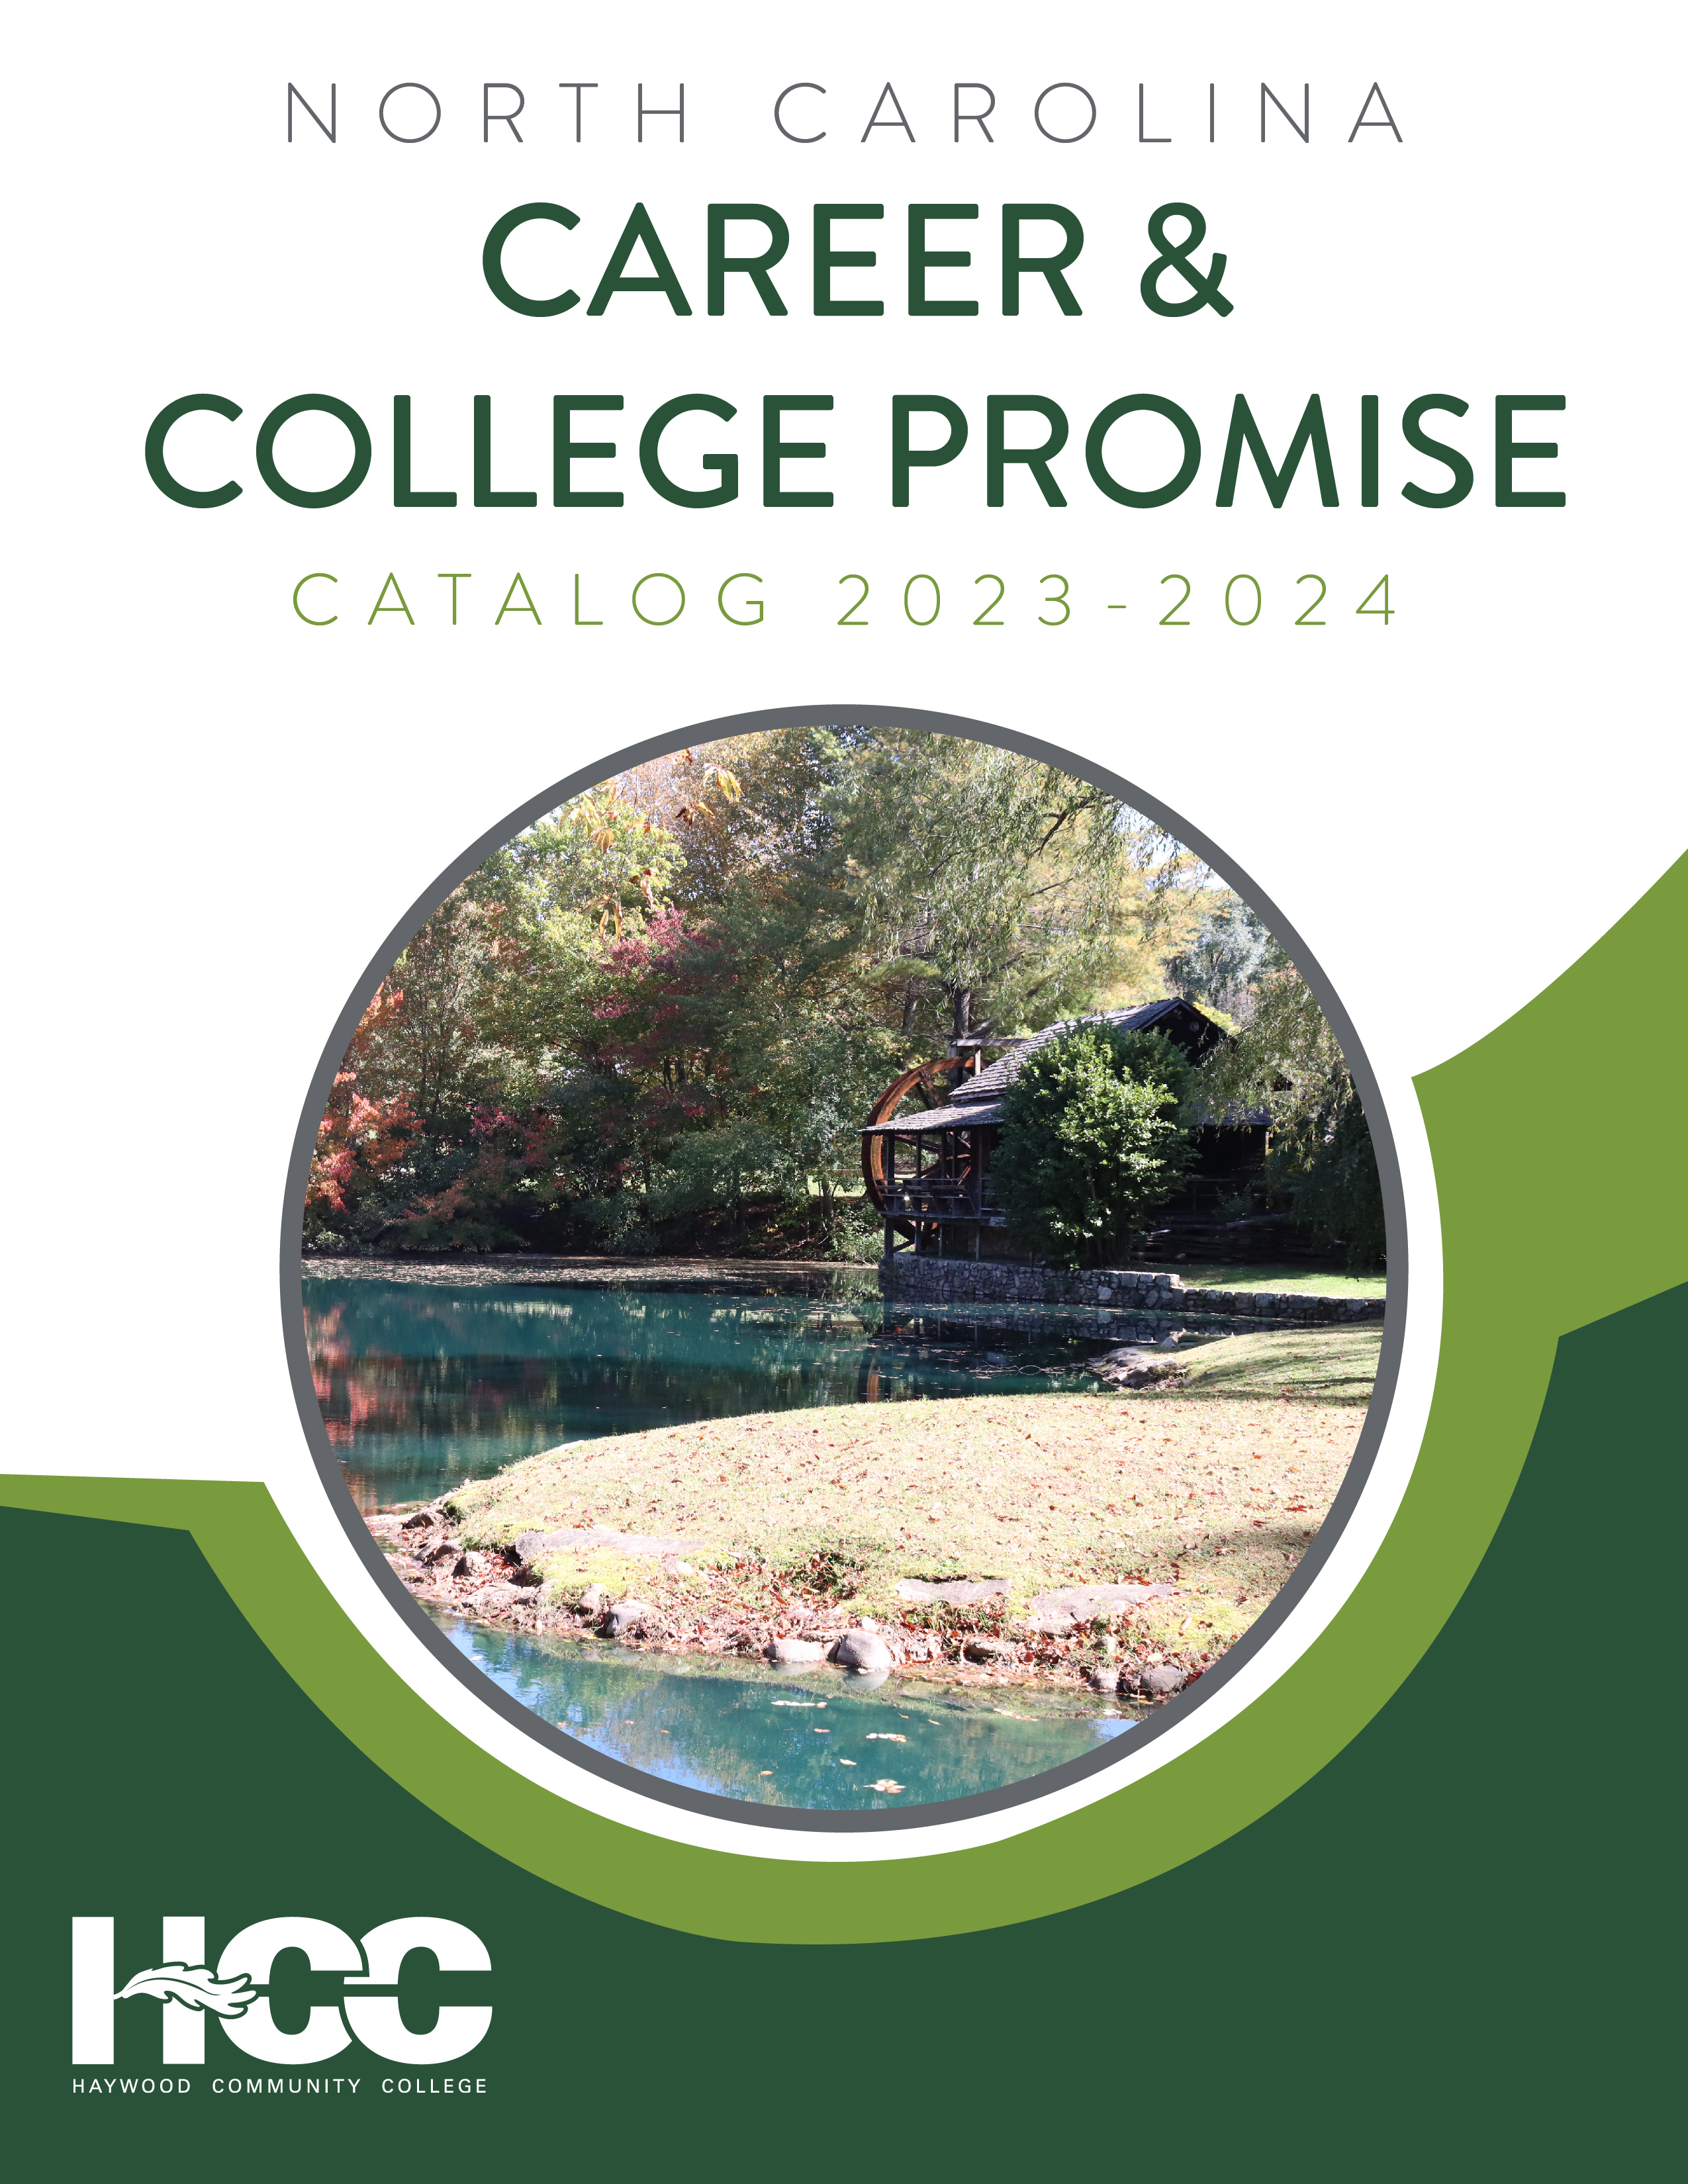 HCC Career & College Promise brochure cover with image of millpond